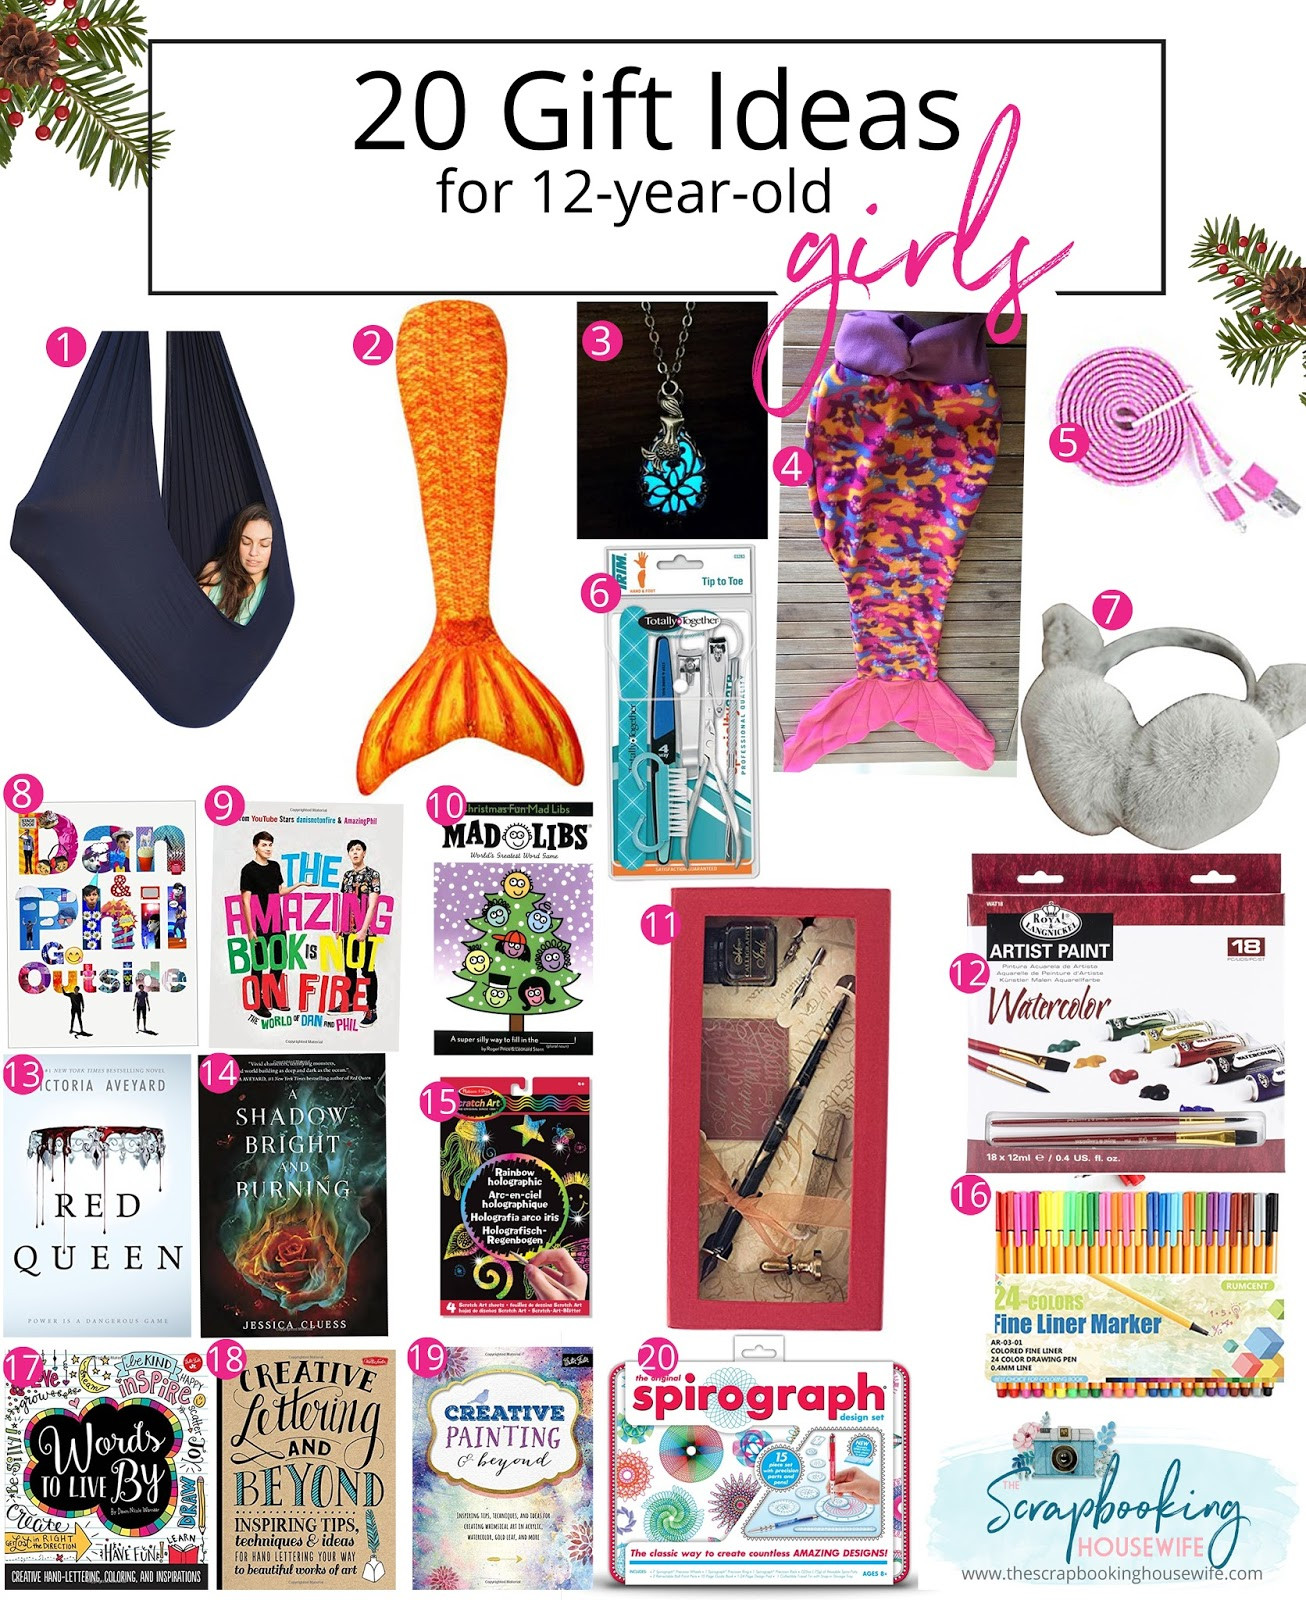 12 Year Old Birthday Gift Ideas
 Ellabella Designs 13 GIFT IDEAS FOR TODDLERS